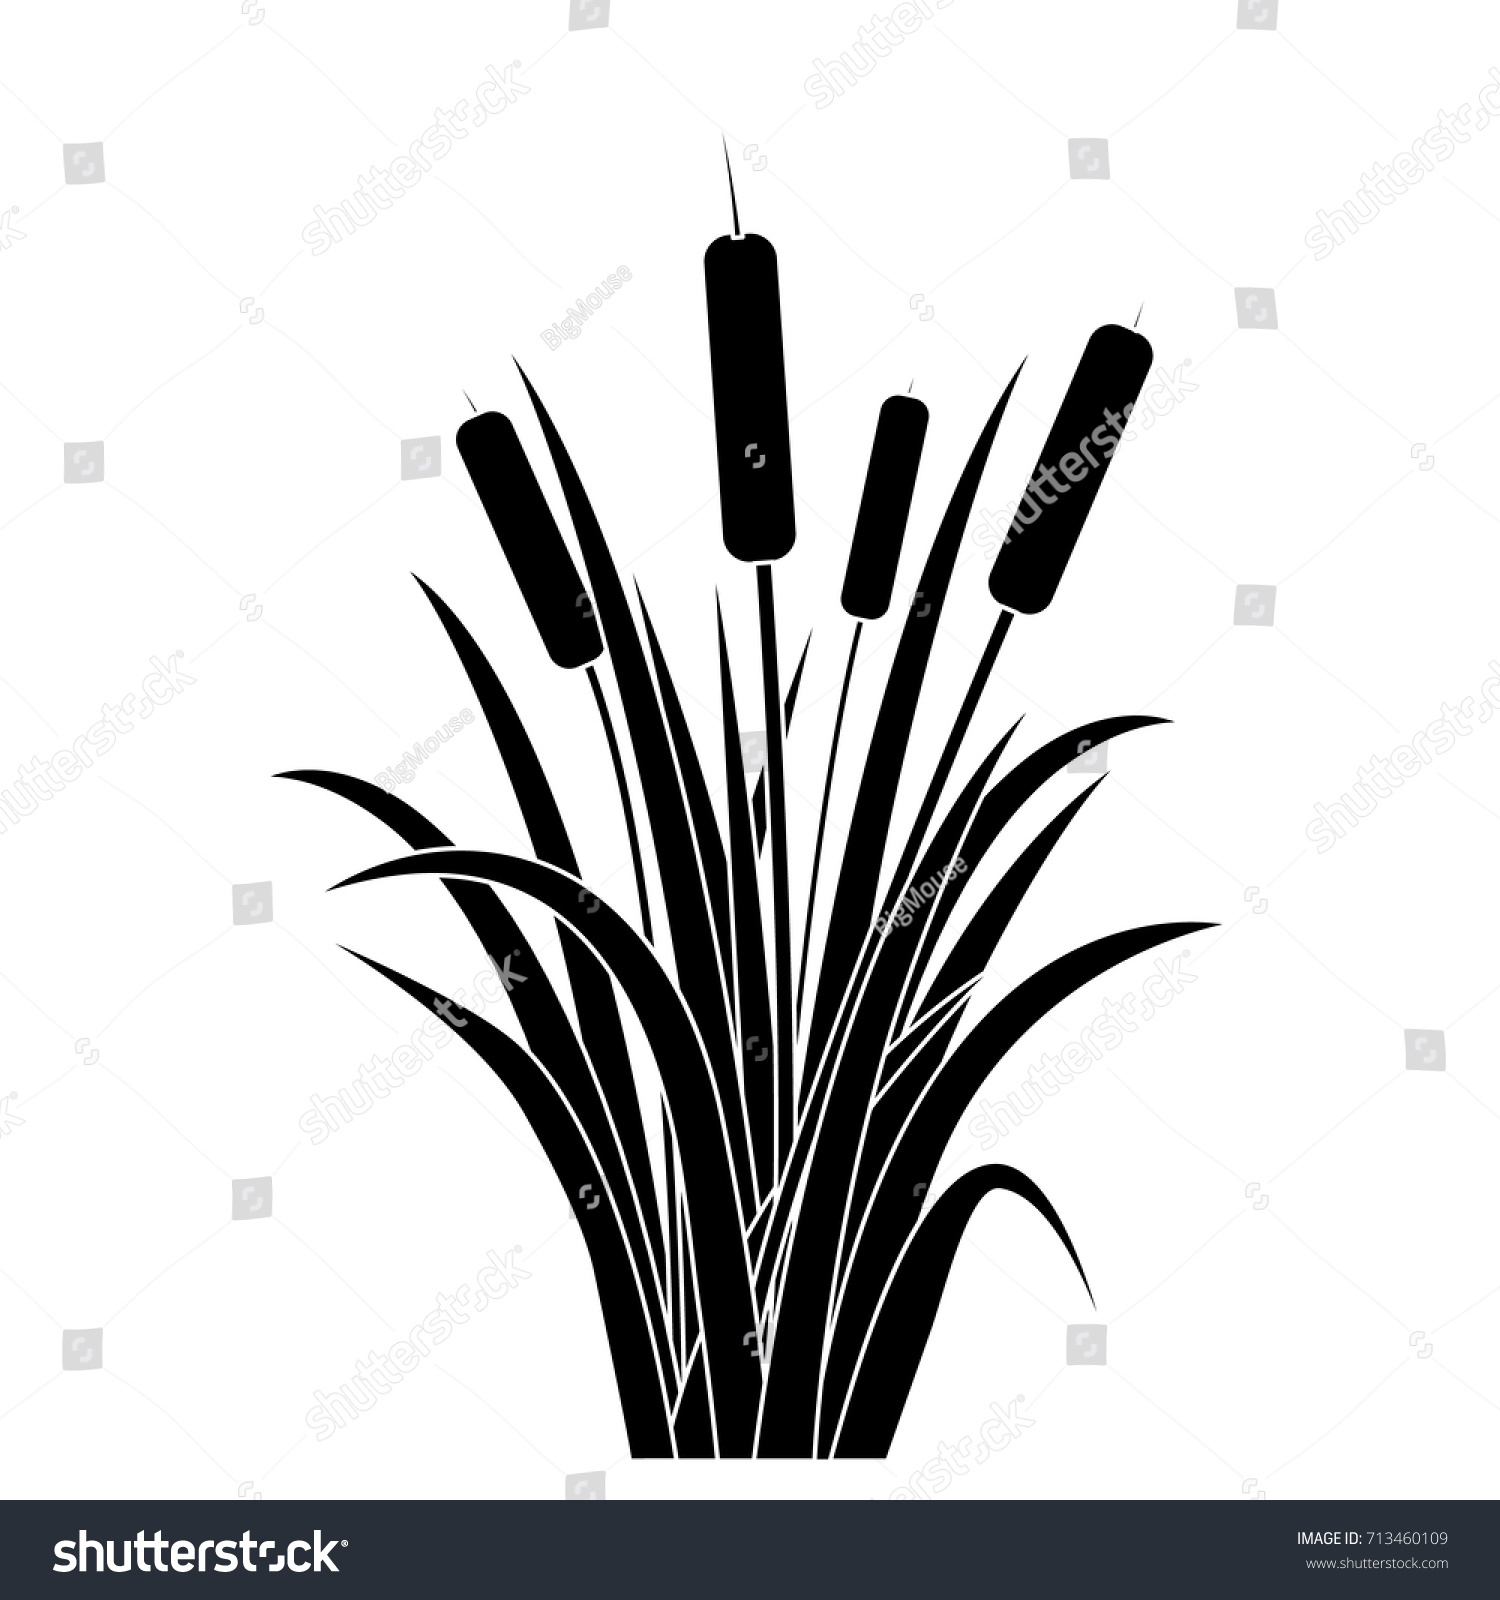 Silhouette Black Water Reed Plant Cattails Stock Vector (Royalty Free ...